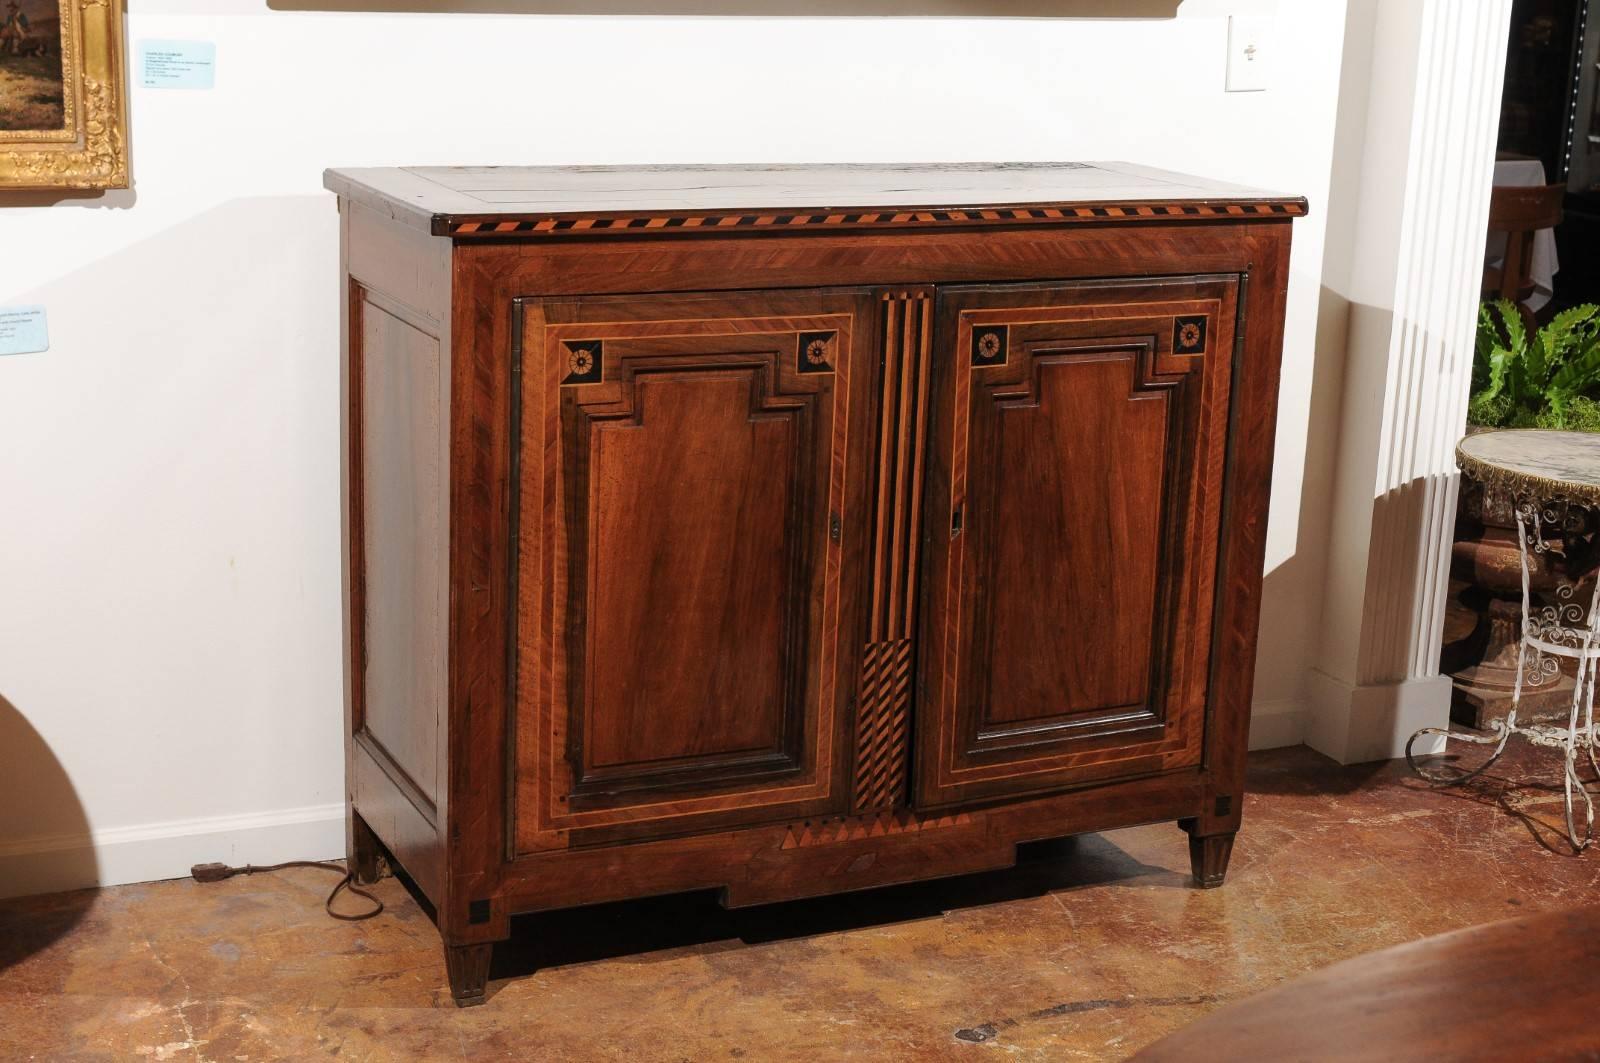 19th Century French Neoclassical Style Mahogany Buffet with Marquetry Inlay from the 1850s